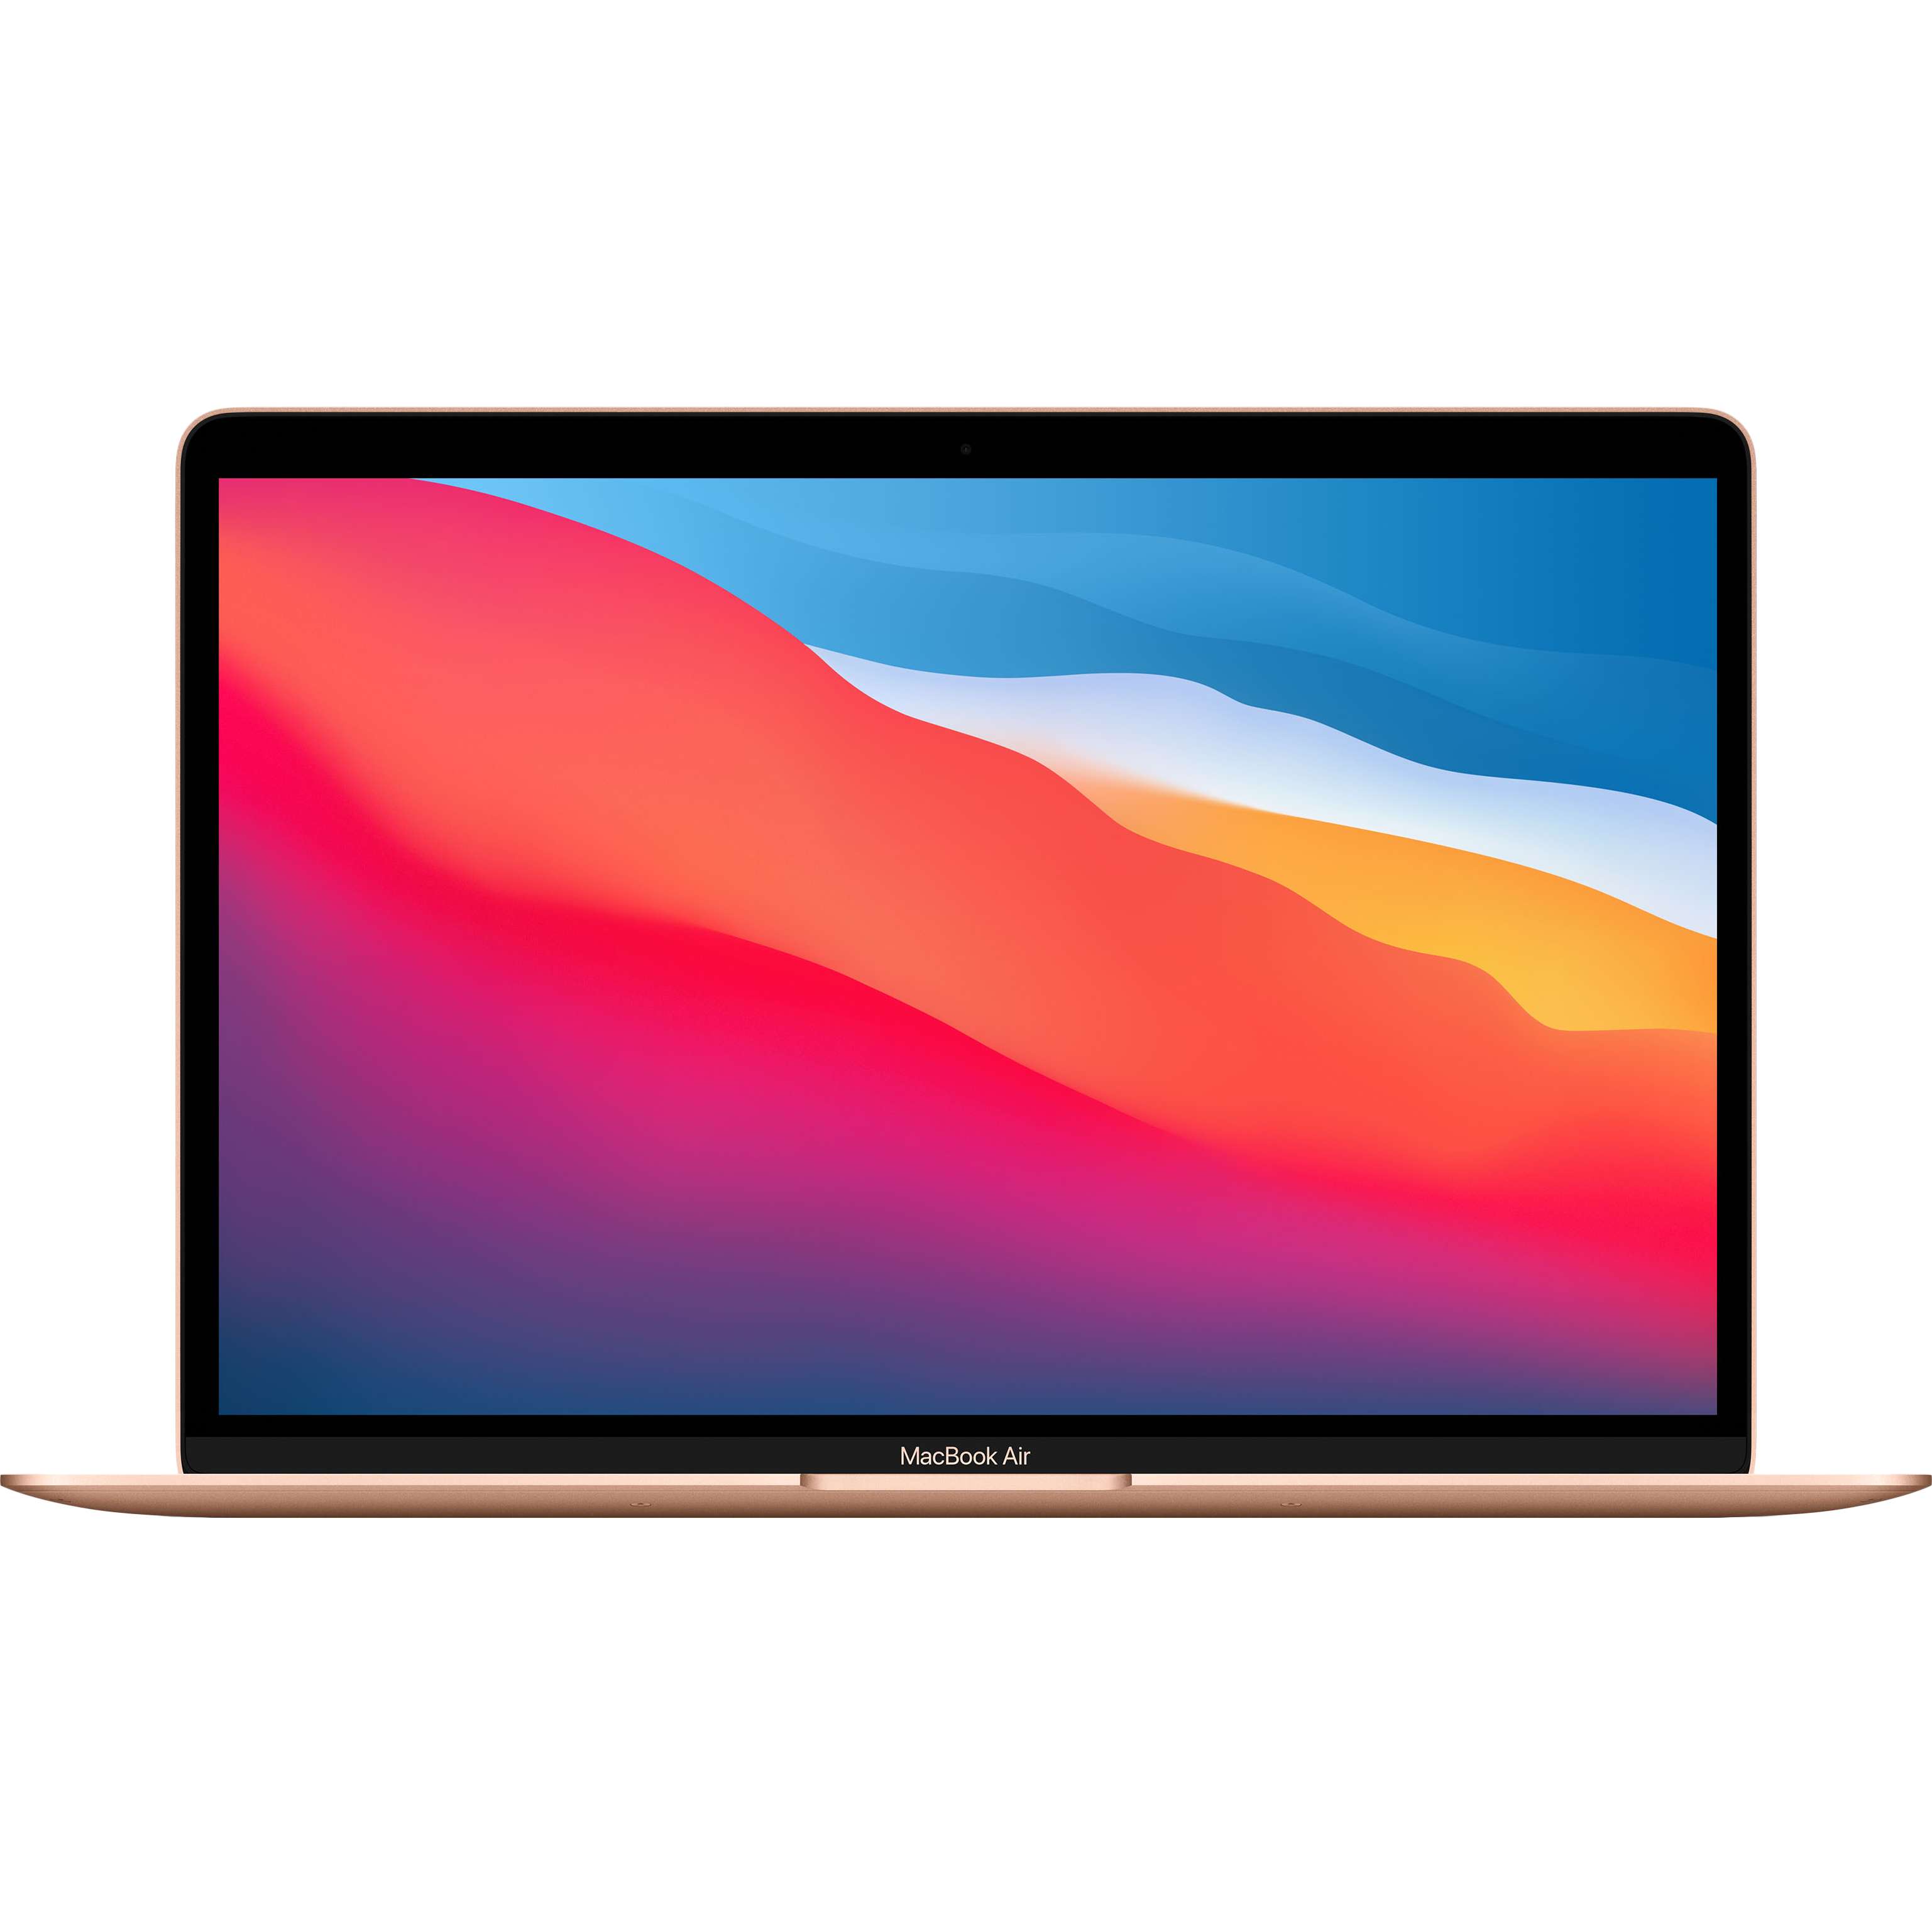 Apple MacBook Air 13.3 MGND3 M1 Chip with Retina Display (Late 2020) Gold